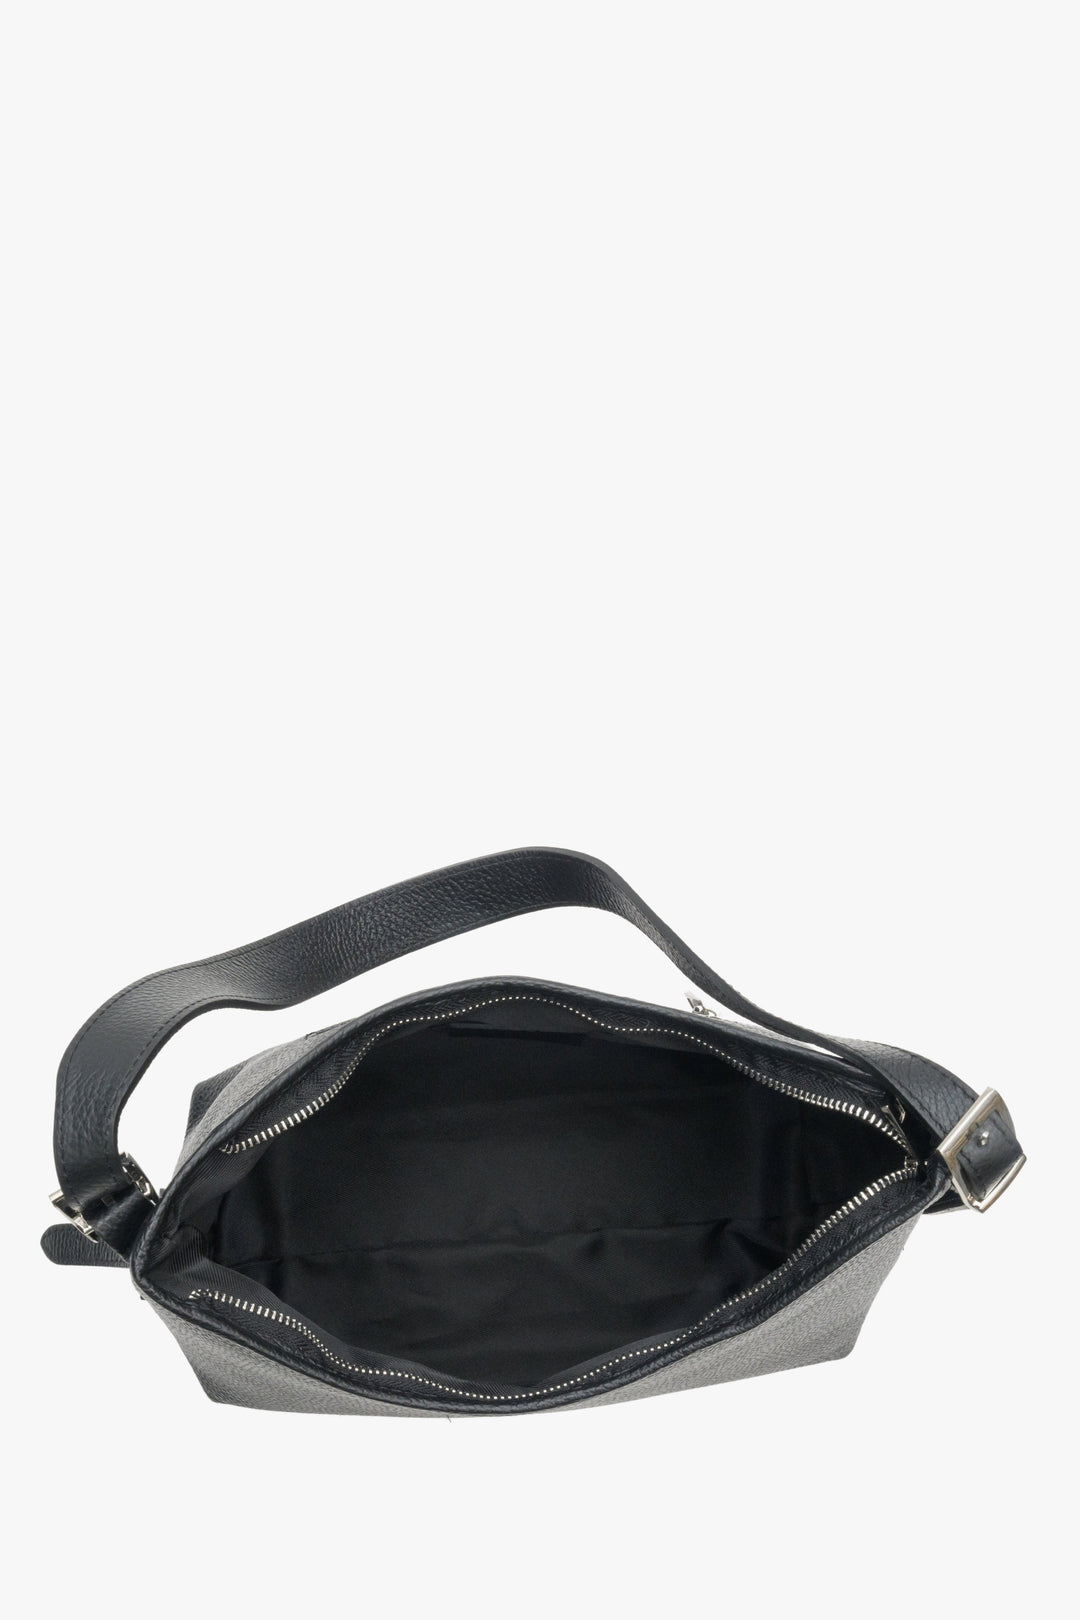 Leather,  women's black handbag by Estro with silver accents - close-up of the interior of the model.